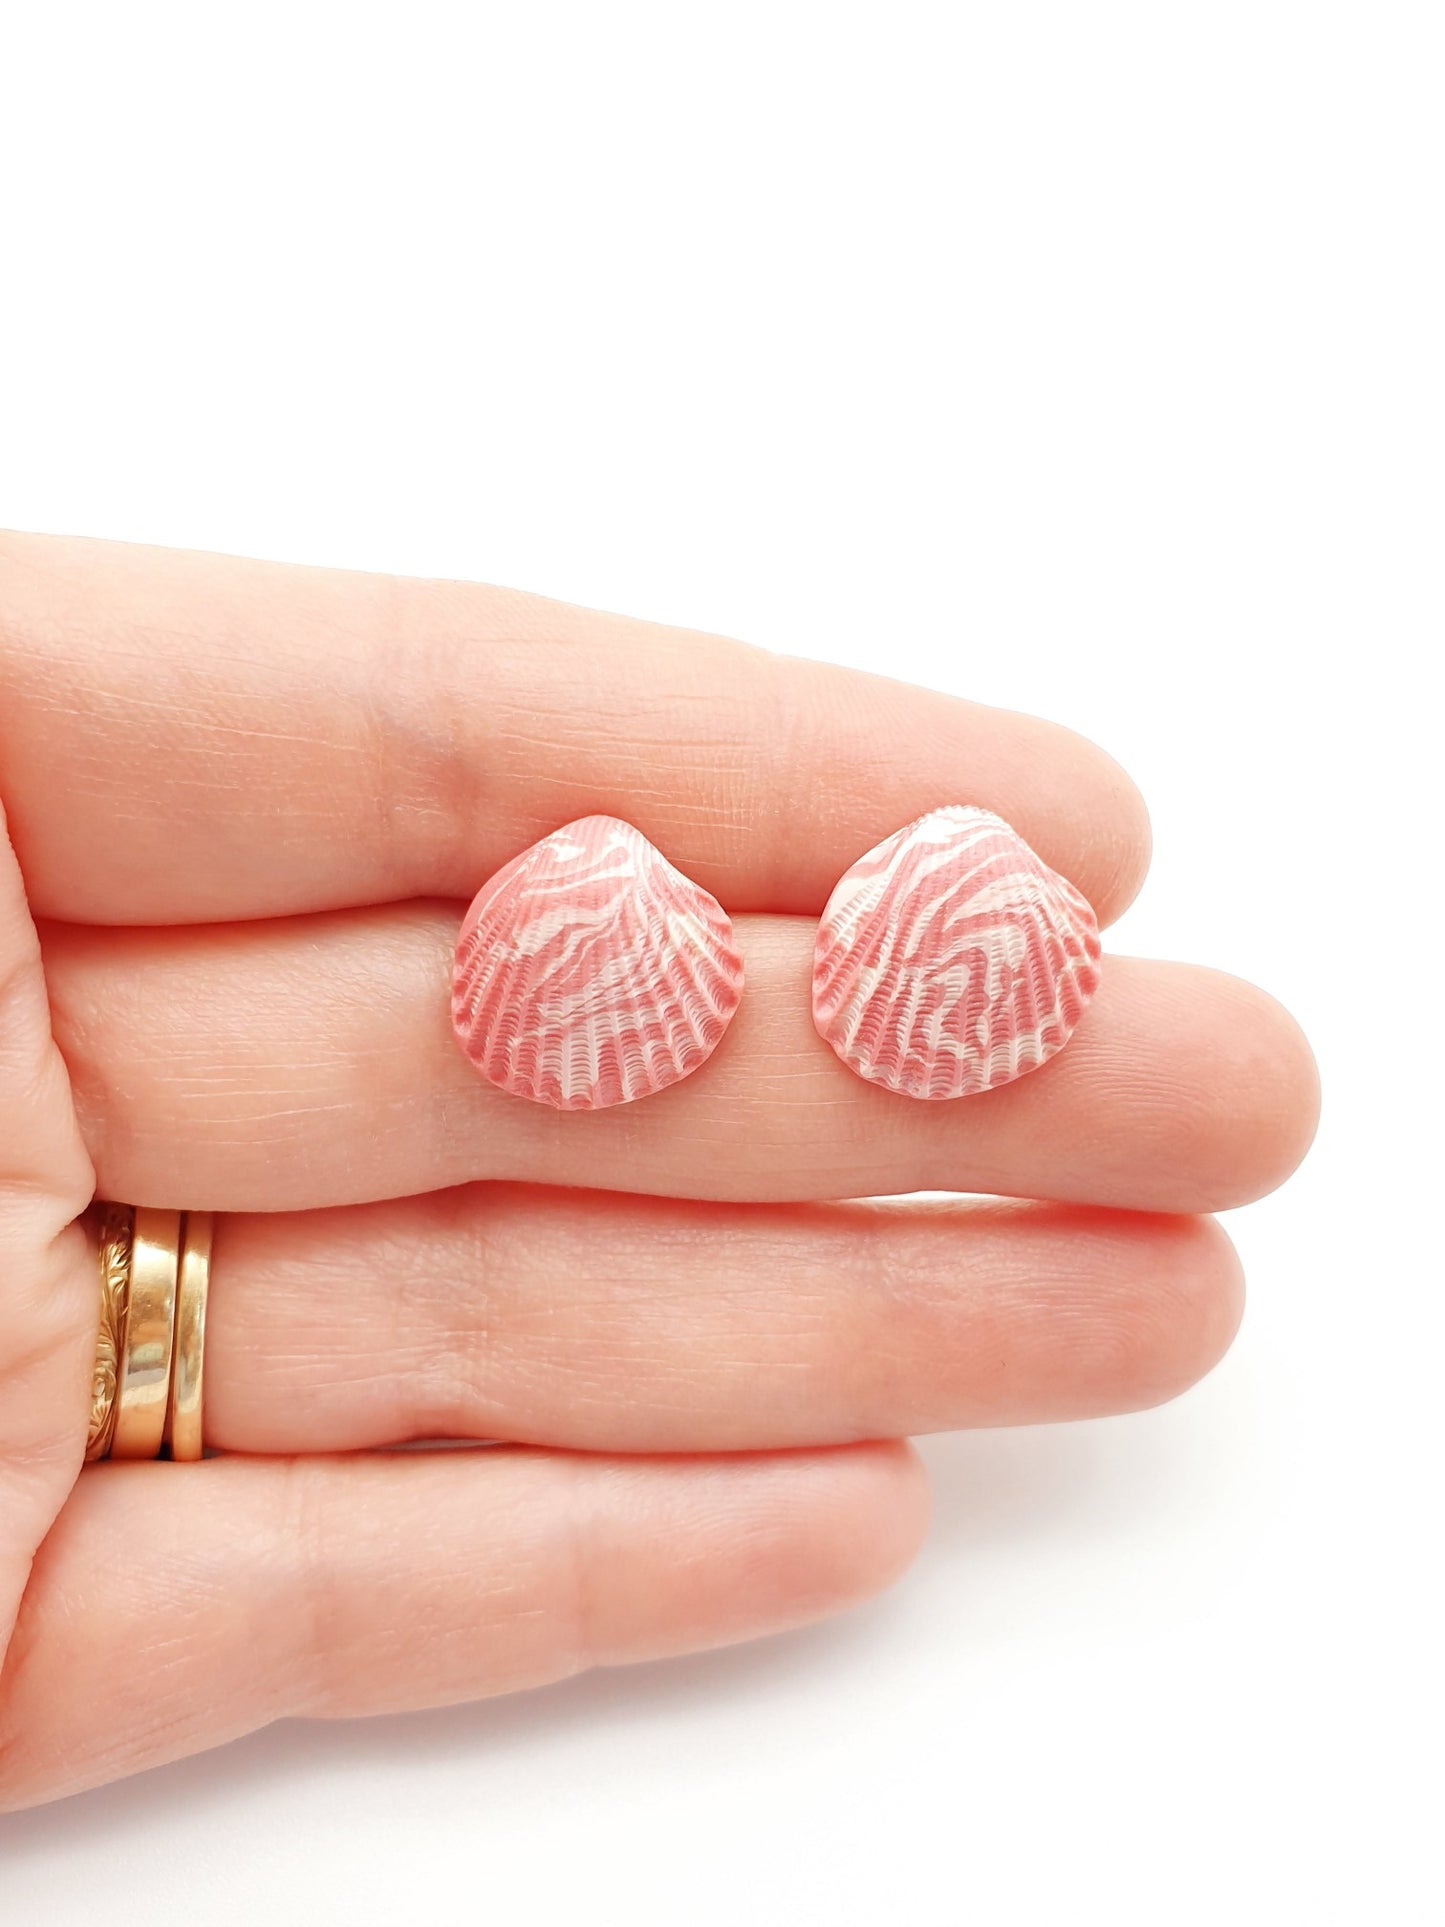 Earring studs - pink & white cockle shells